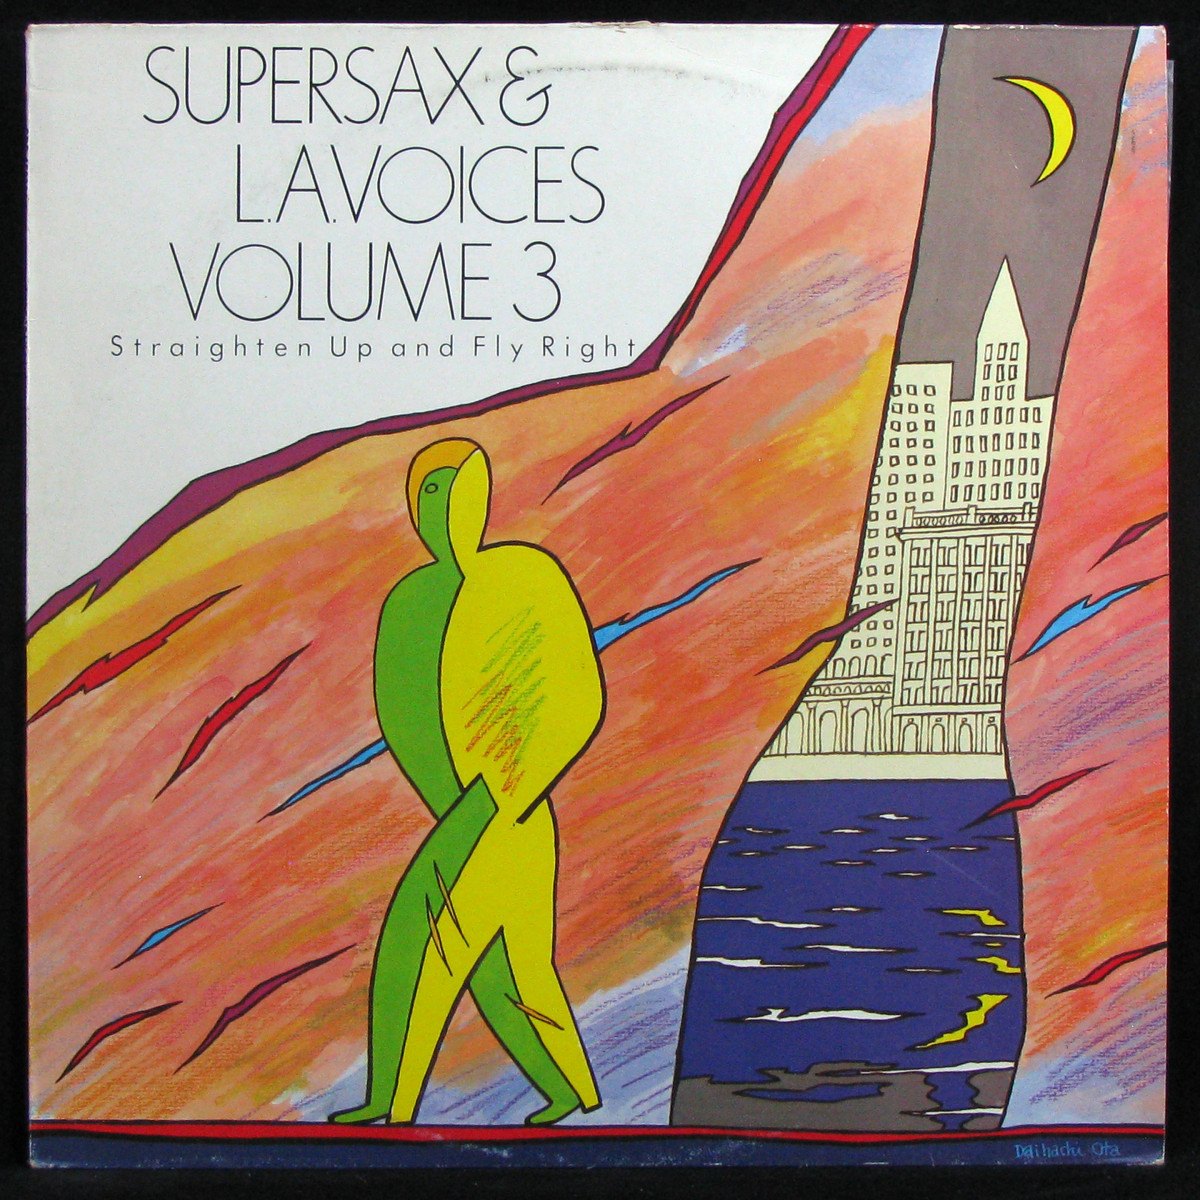 Supersax & L.A. Voices Volume 3 - Straighten Up And Fly Right